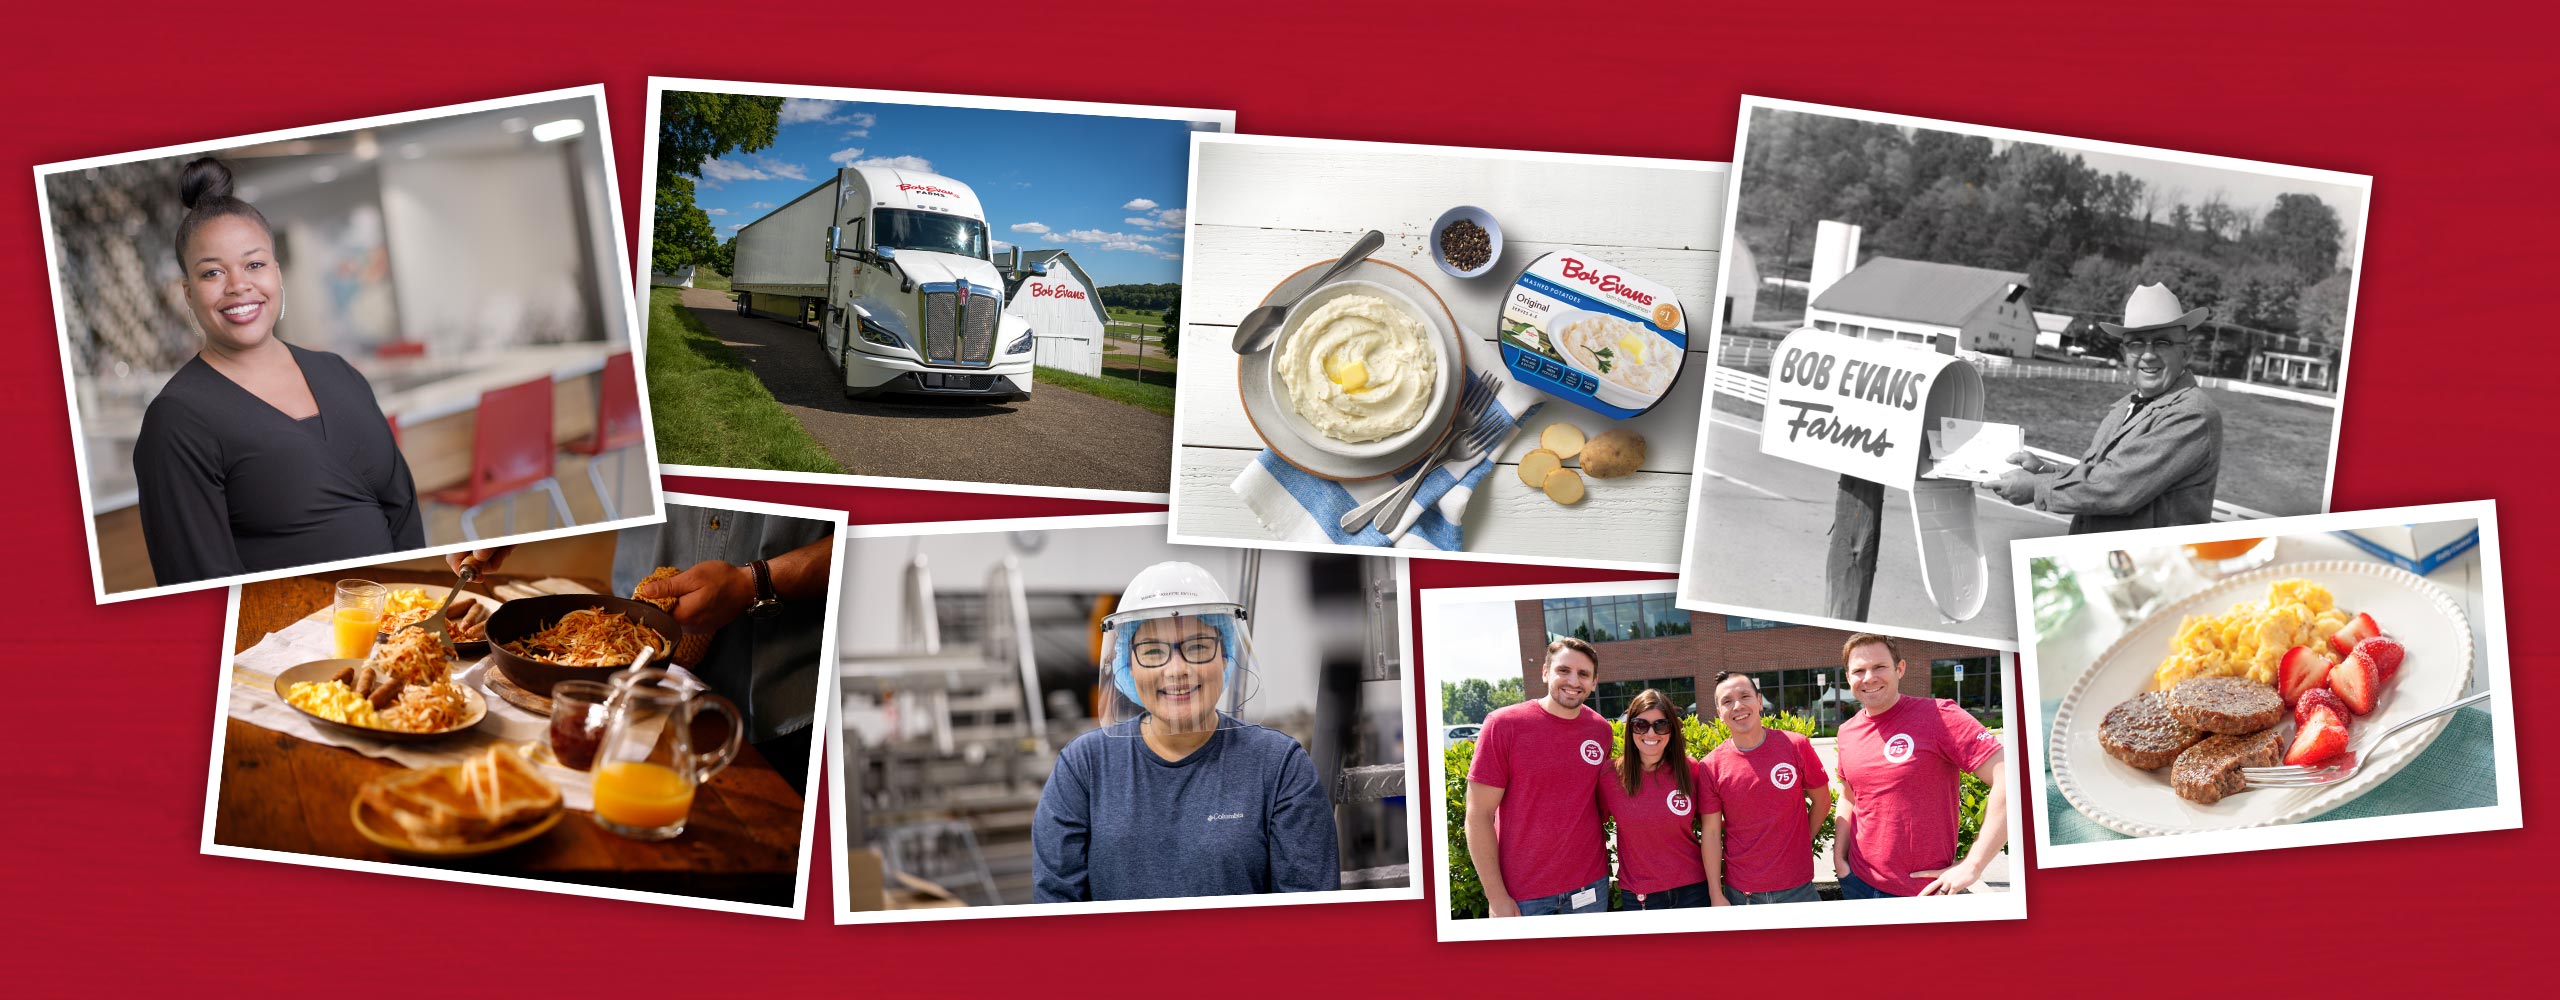 About Bob Evans - Photo of team members, meals made with Bob Evans Farms products, and a Bob Evans truck